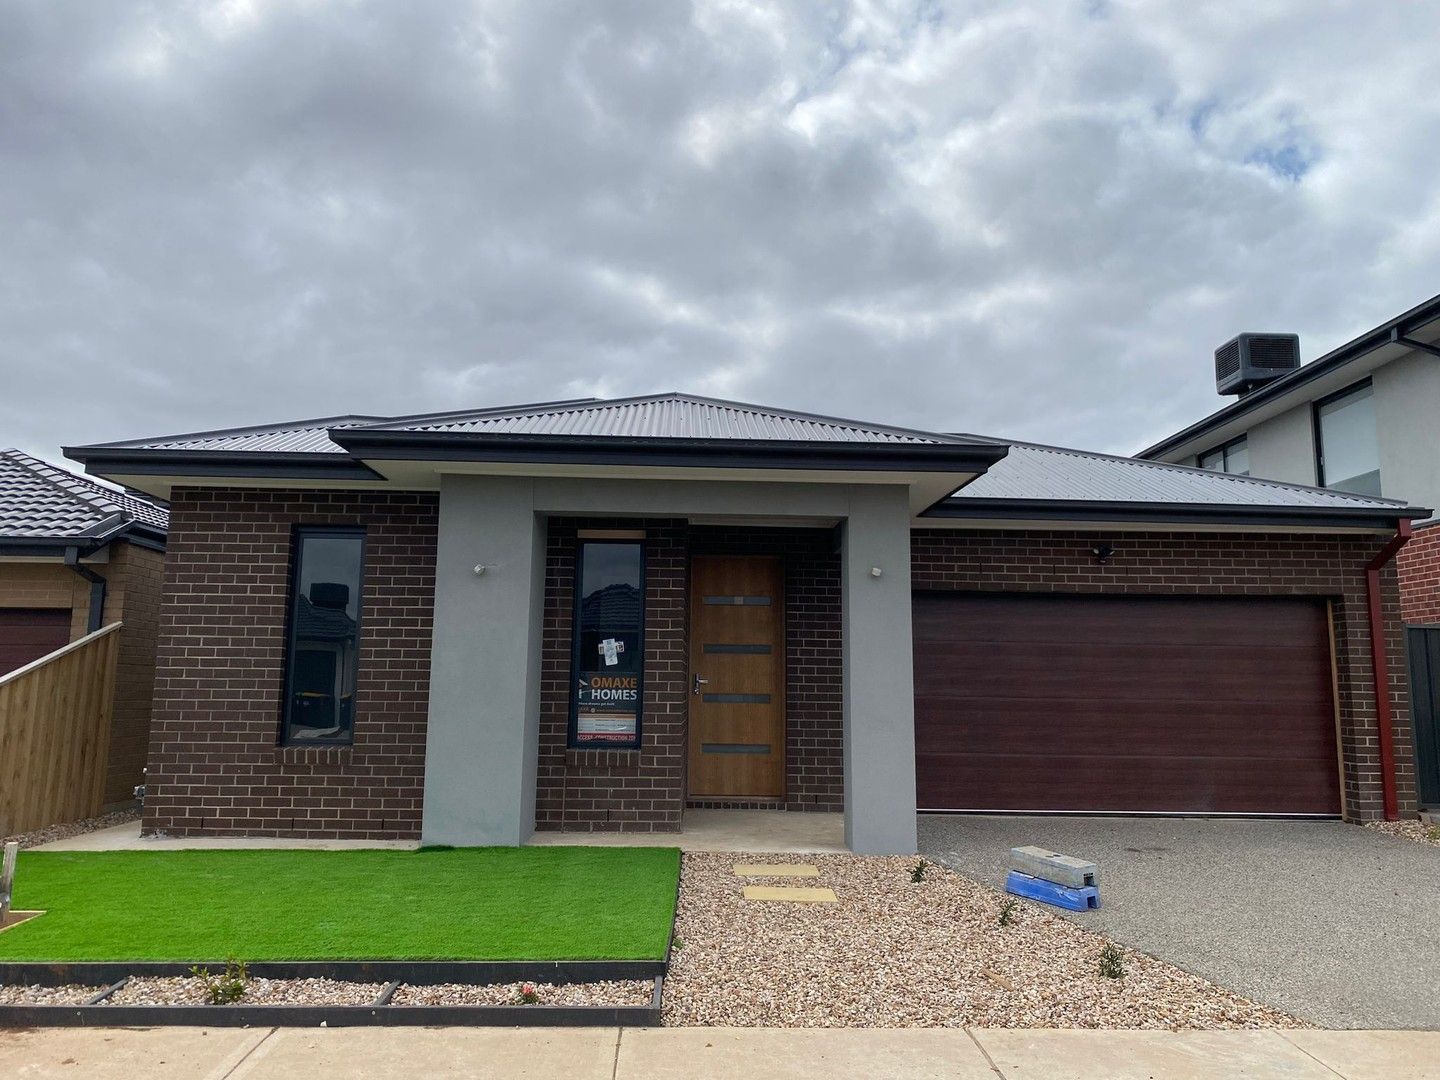 4 bedrooms New House & Land in 14 Gibbs Street DEANSIDE VIC, 3336